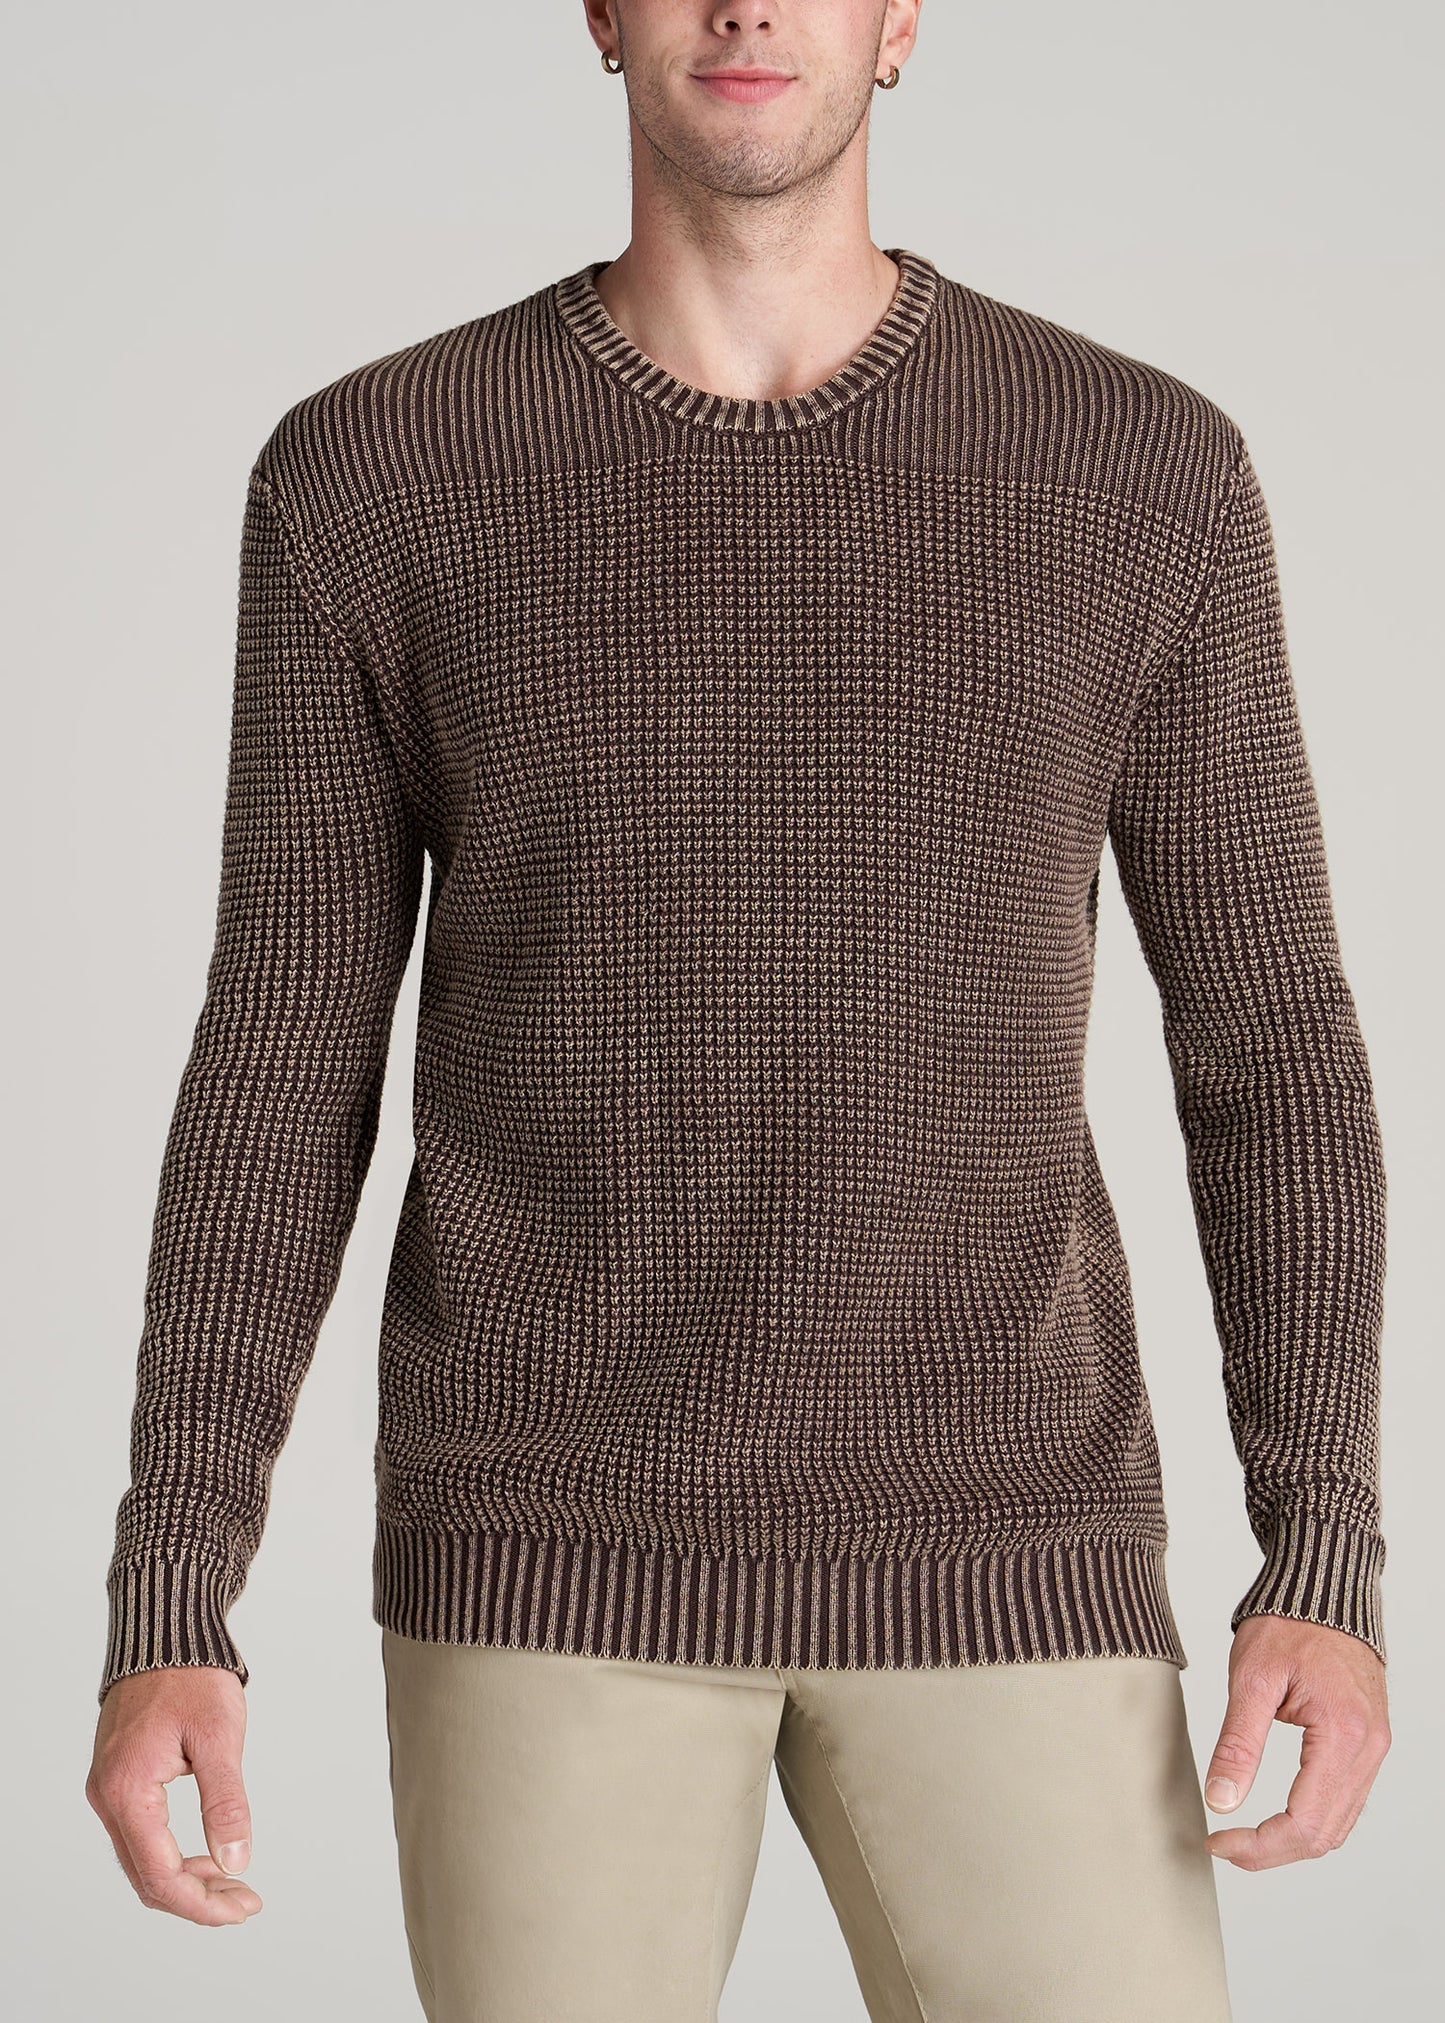 Tall guy wearing American Tall's LJ&S Acid Wash Knit Sweater in the color Dark Brown.